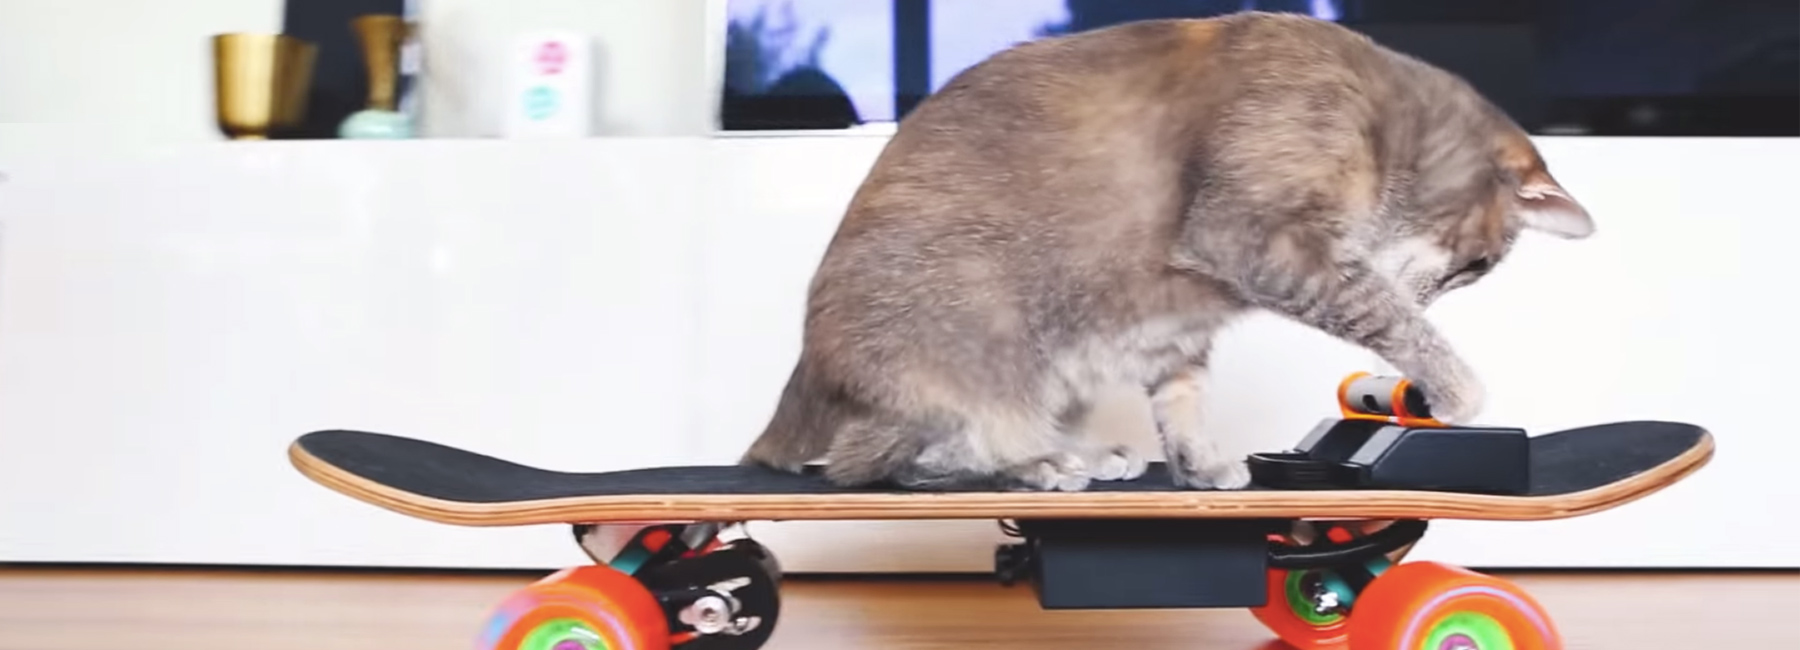 this designer built an electric skateboard for his cat